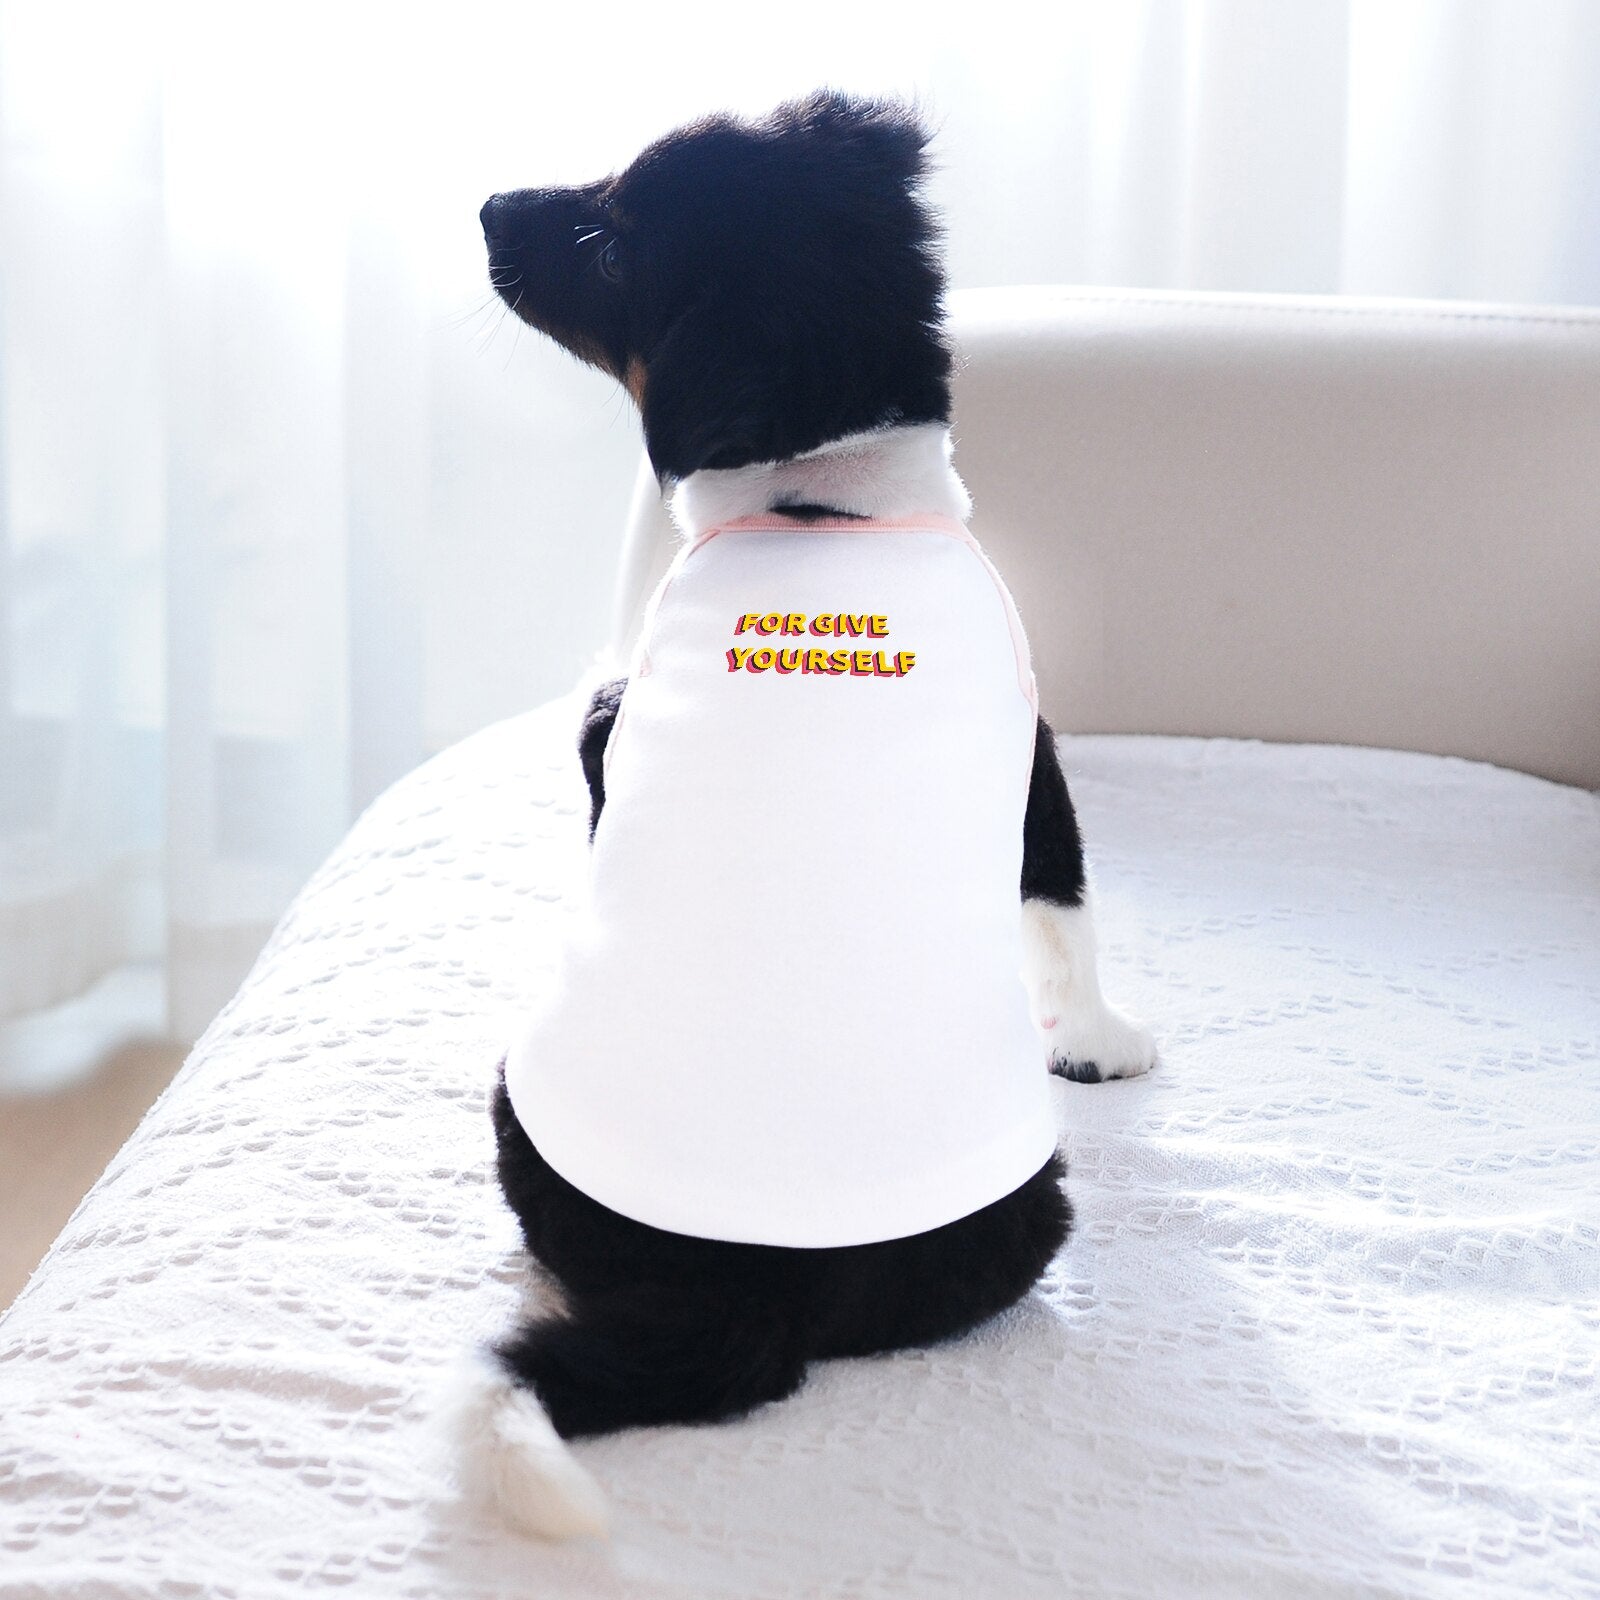 Cute Printed Pet Vest Sleveless Tshirt Tee, Clothes for Small Medium Large Dogs Cats, Chihuahua French Bulldogs Yorkshire Etc.